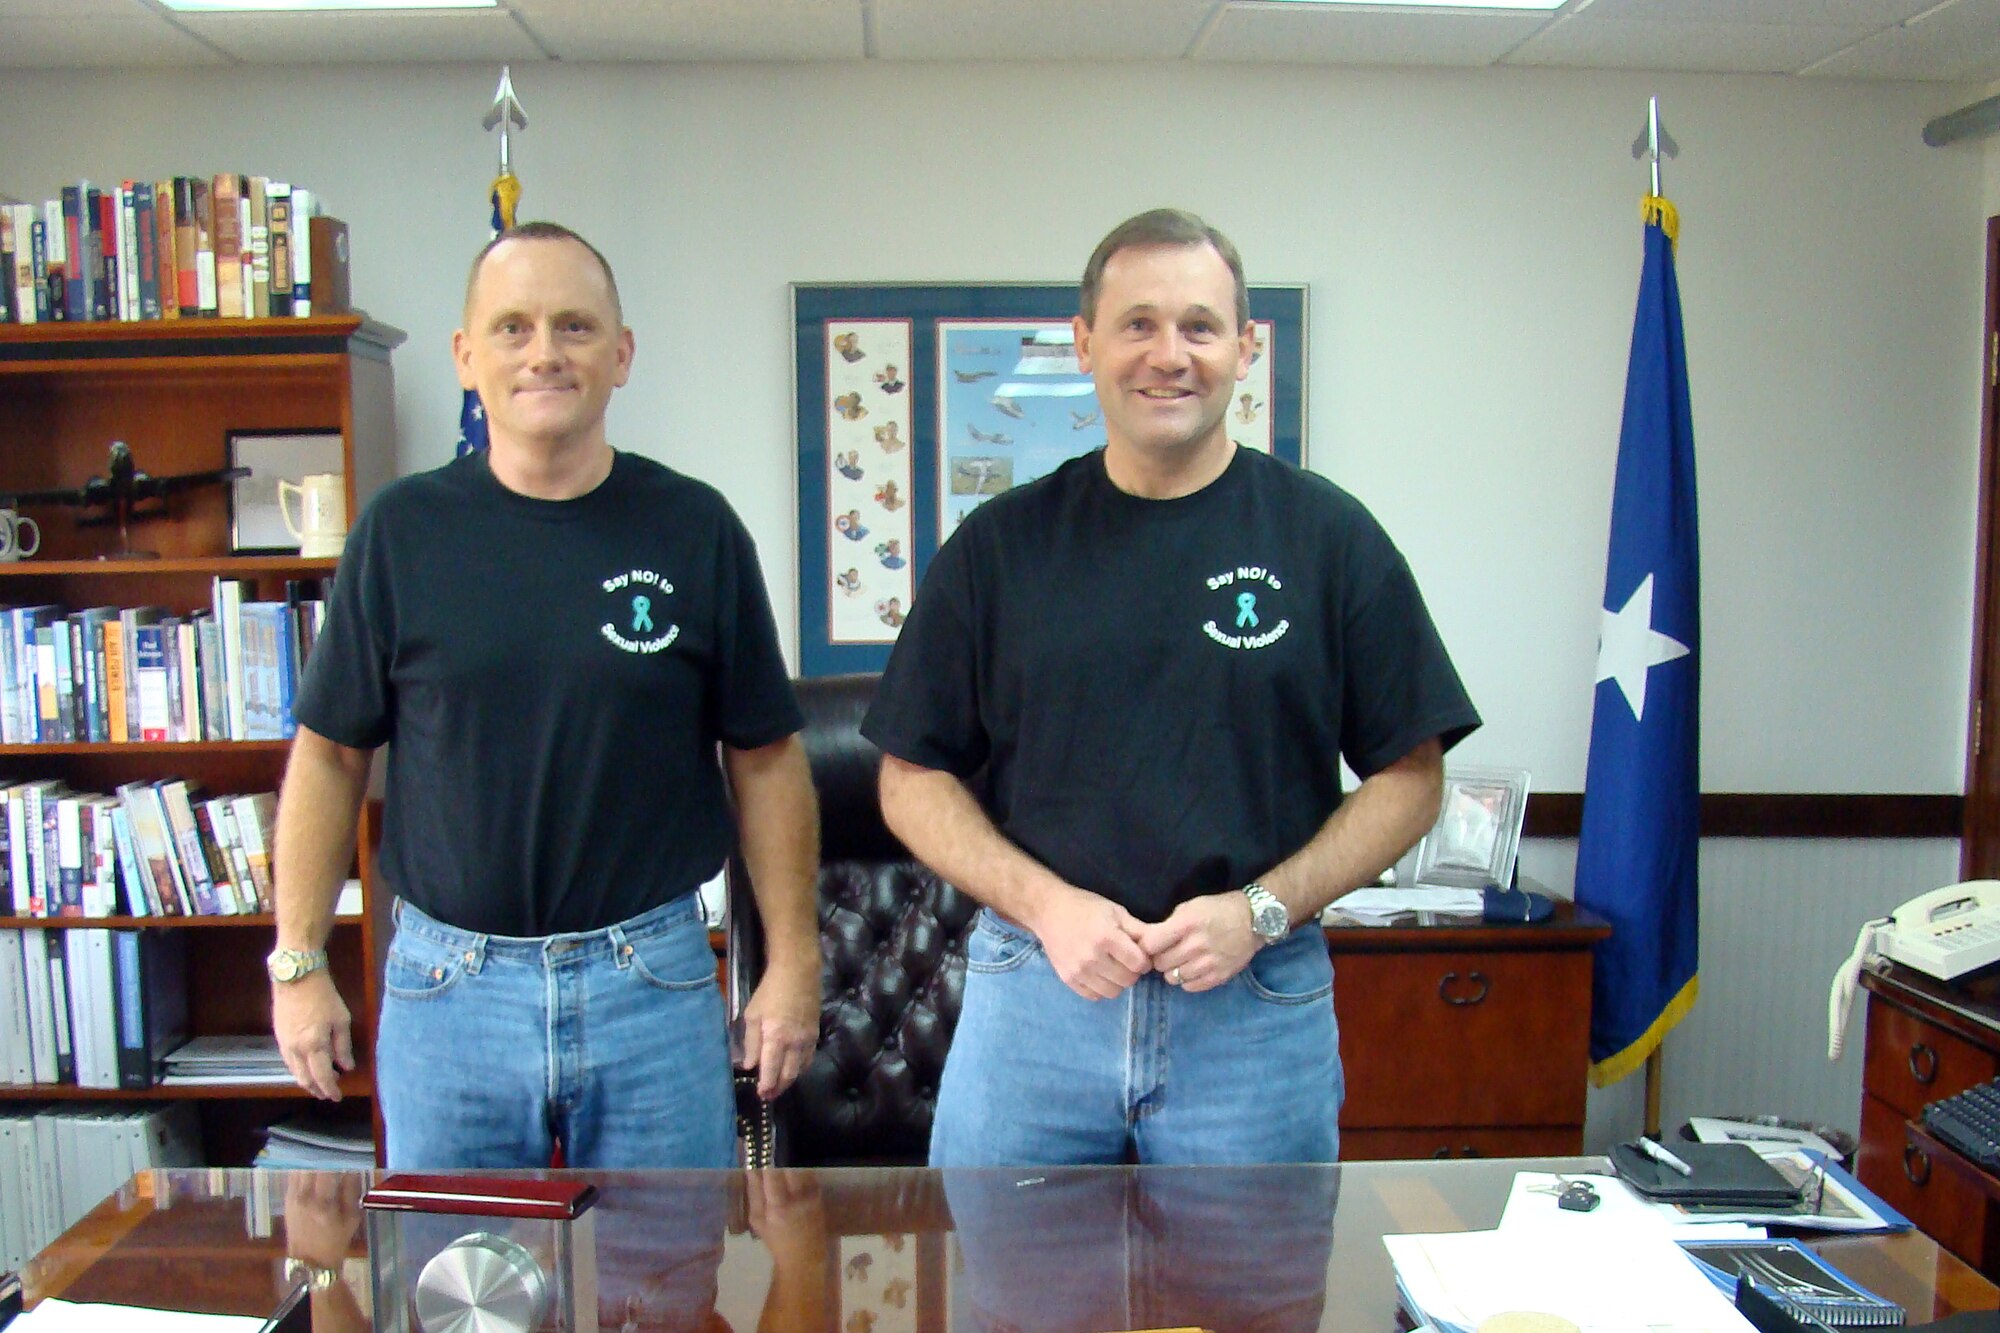 Leadership of the 36th Wing, Brig. Gen. Owens, 36th Wing Commander and Col. Gregory Cain 36th Wing Vice Commander supported Denim Day Apr. 25 by wearing the Denim Day t-shirt on sale throughout the month of April. (Courtesy photo by Shari Freeman)